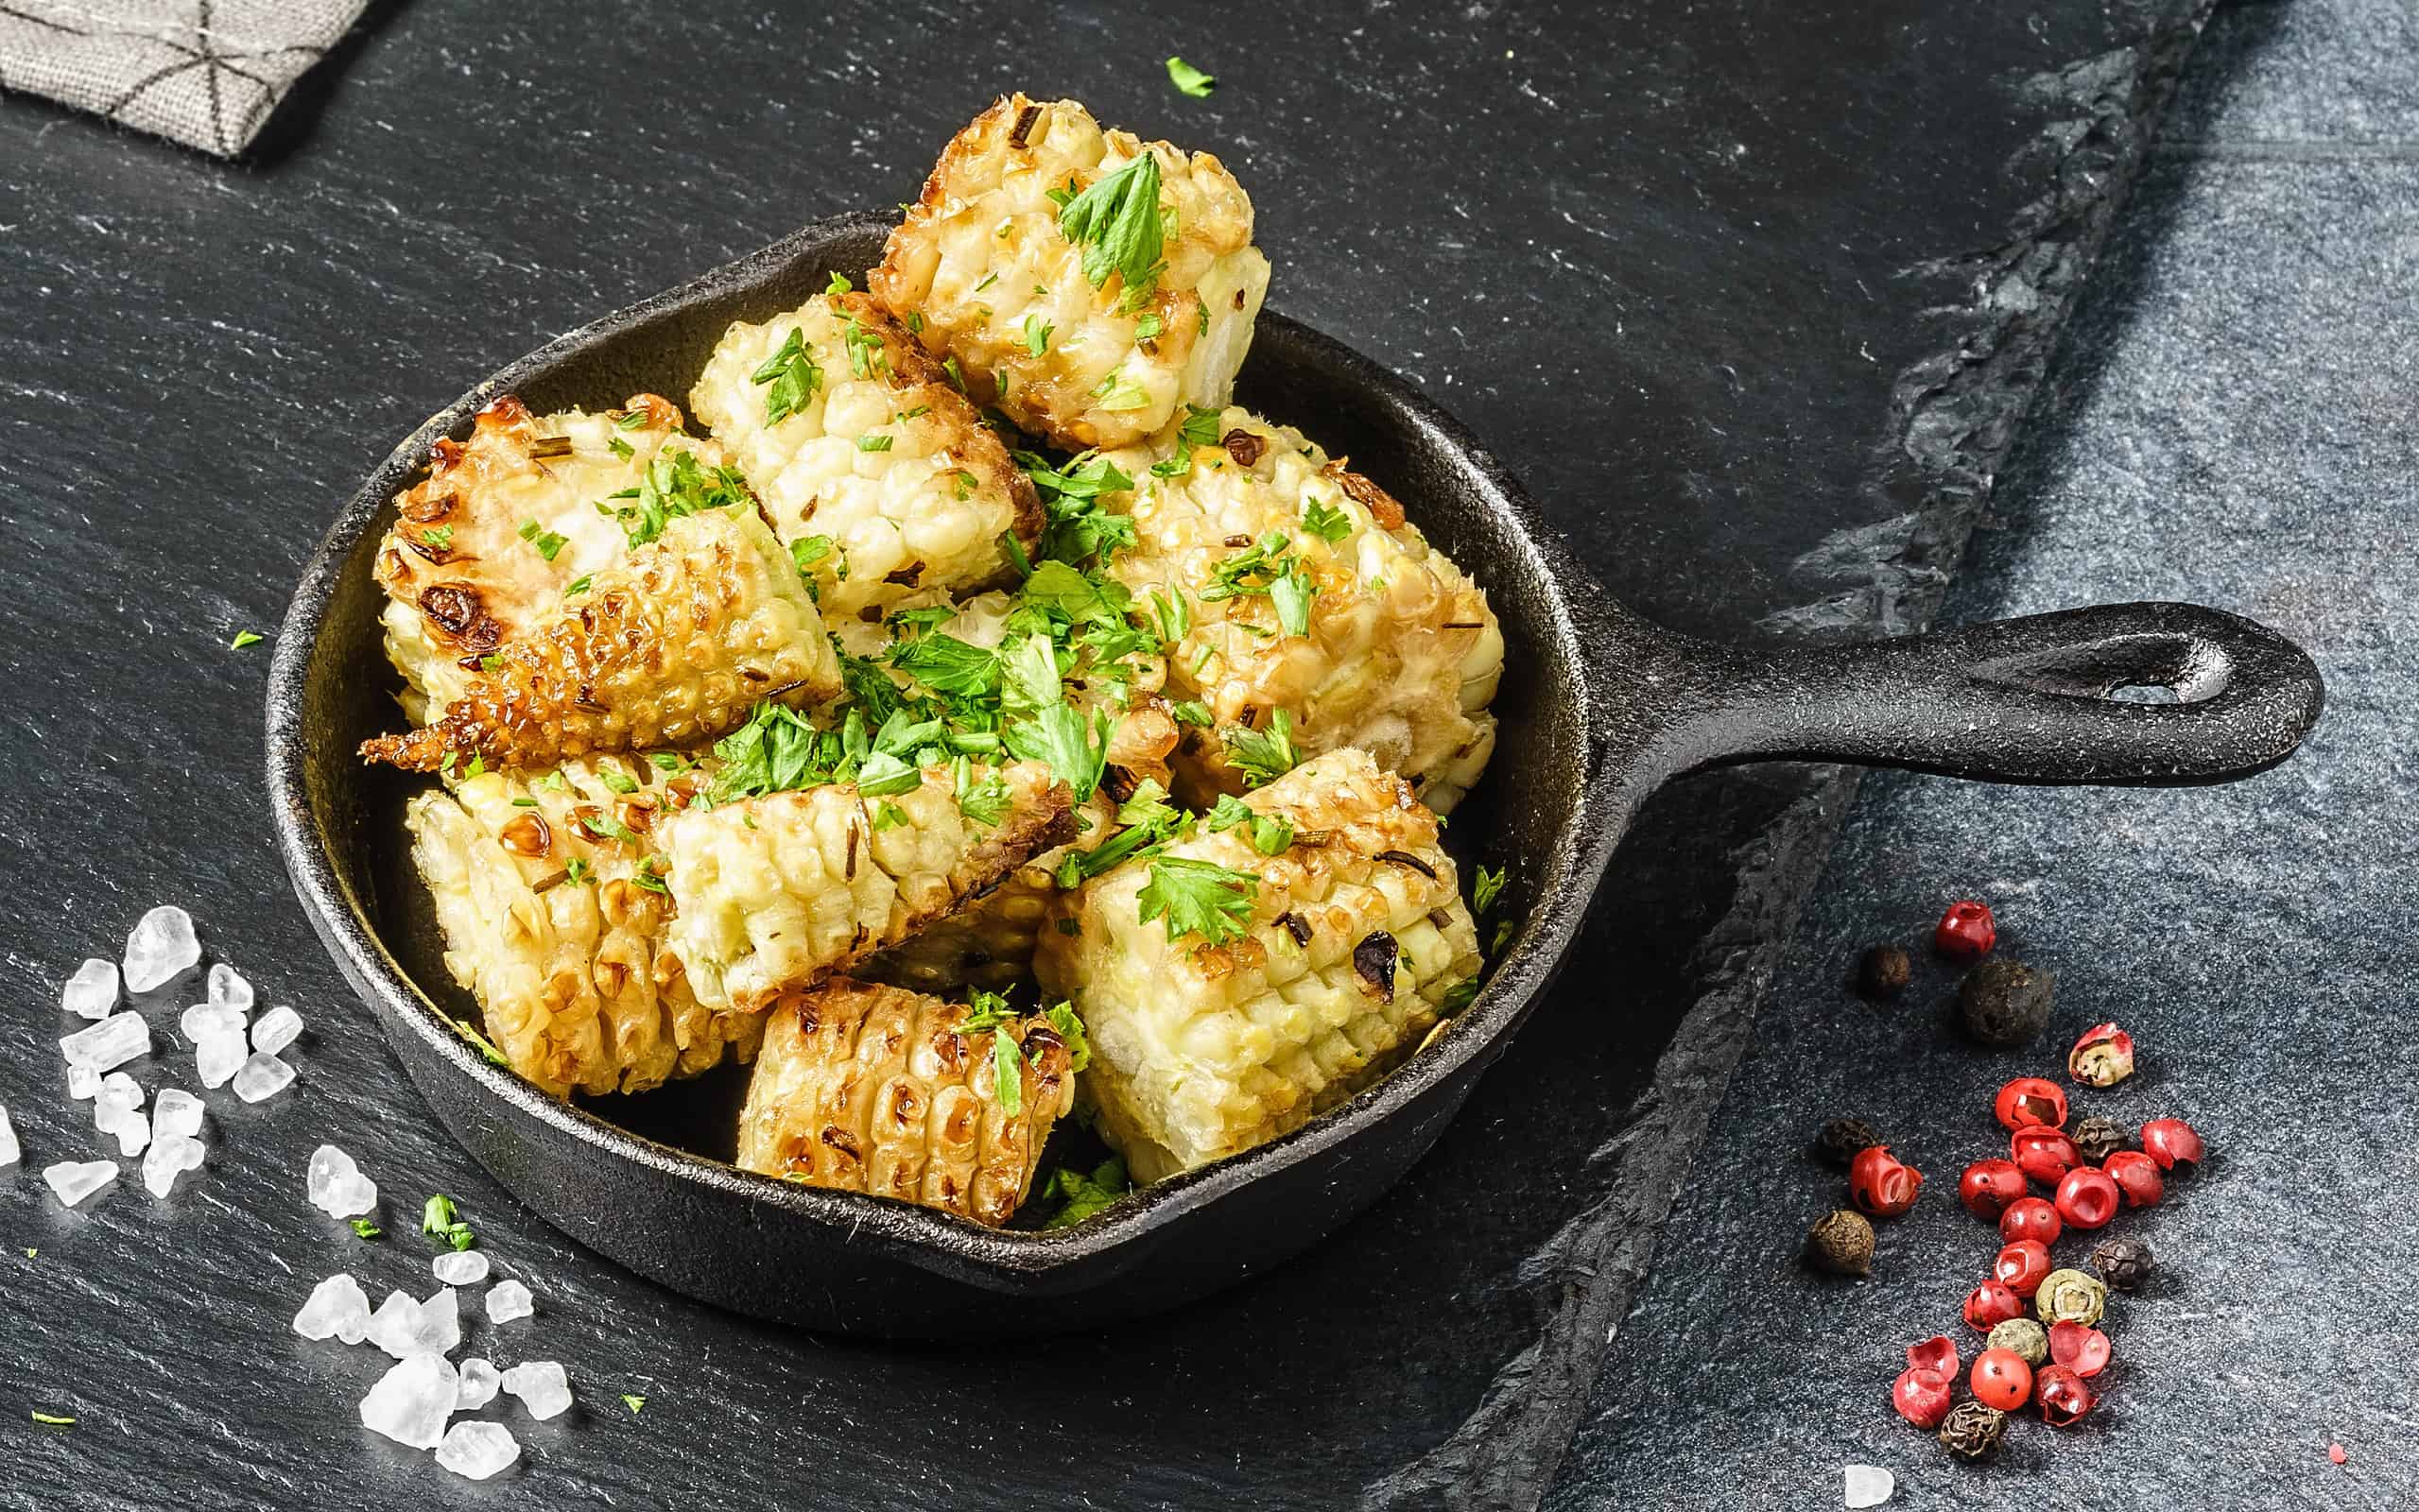 Small roasted corn on the cob